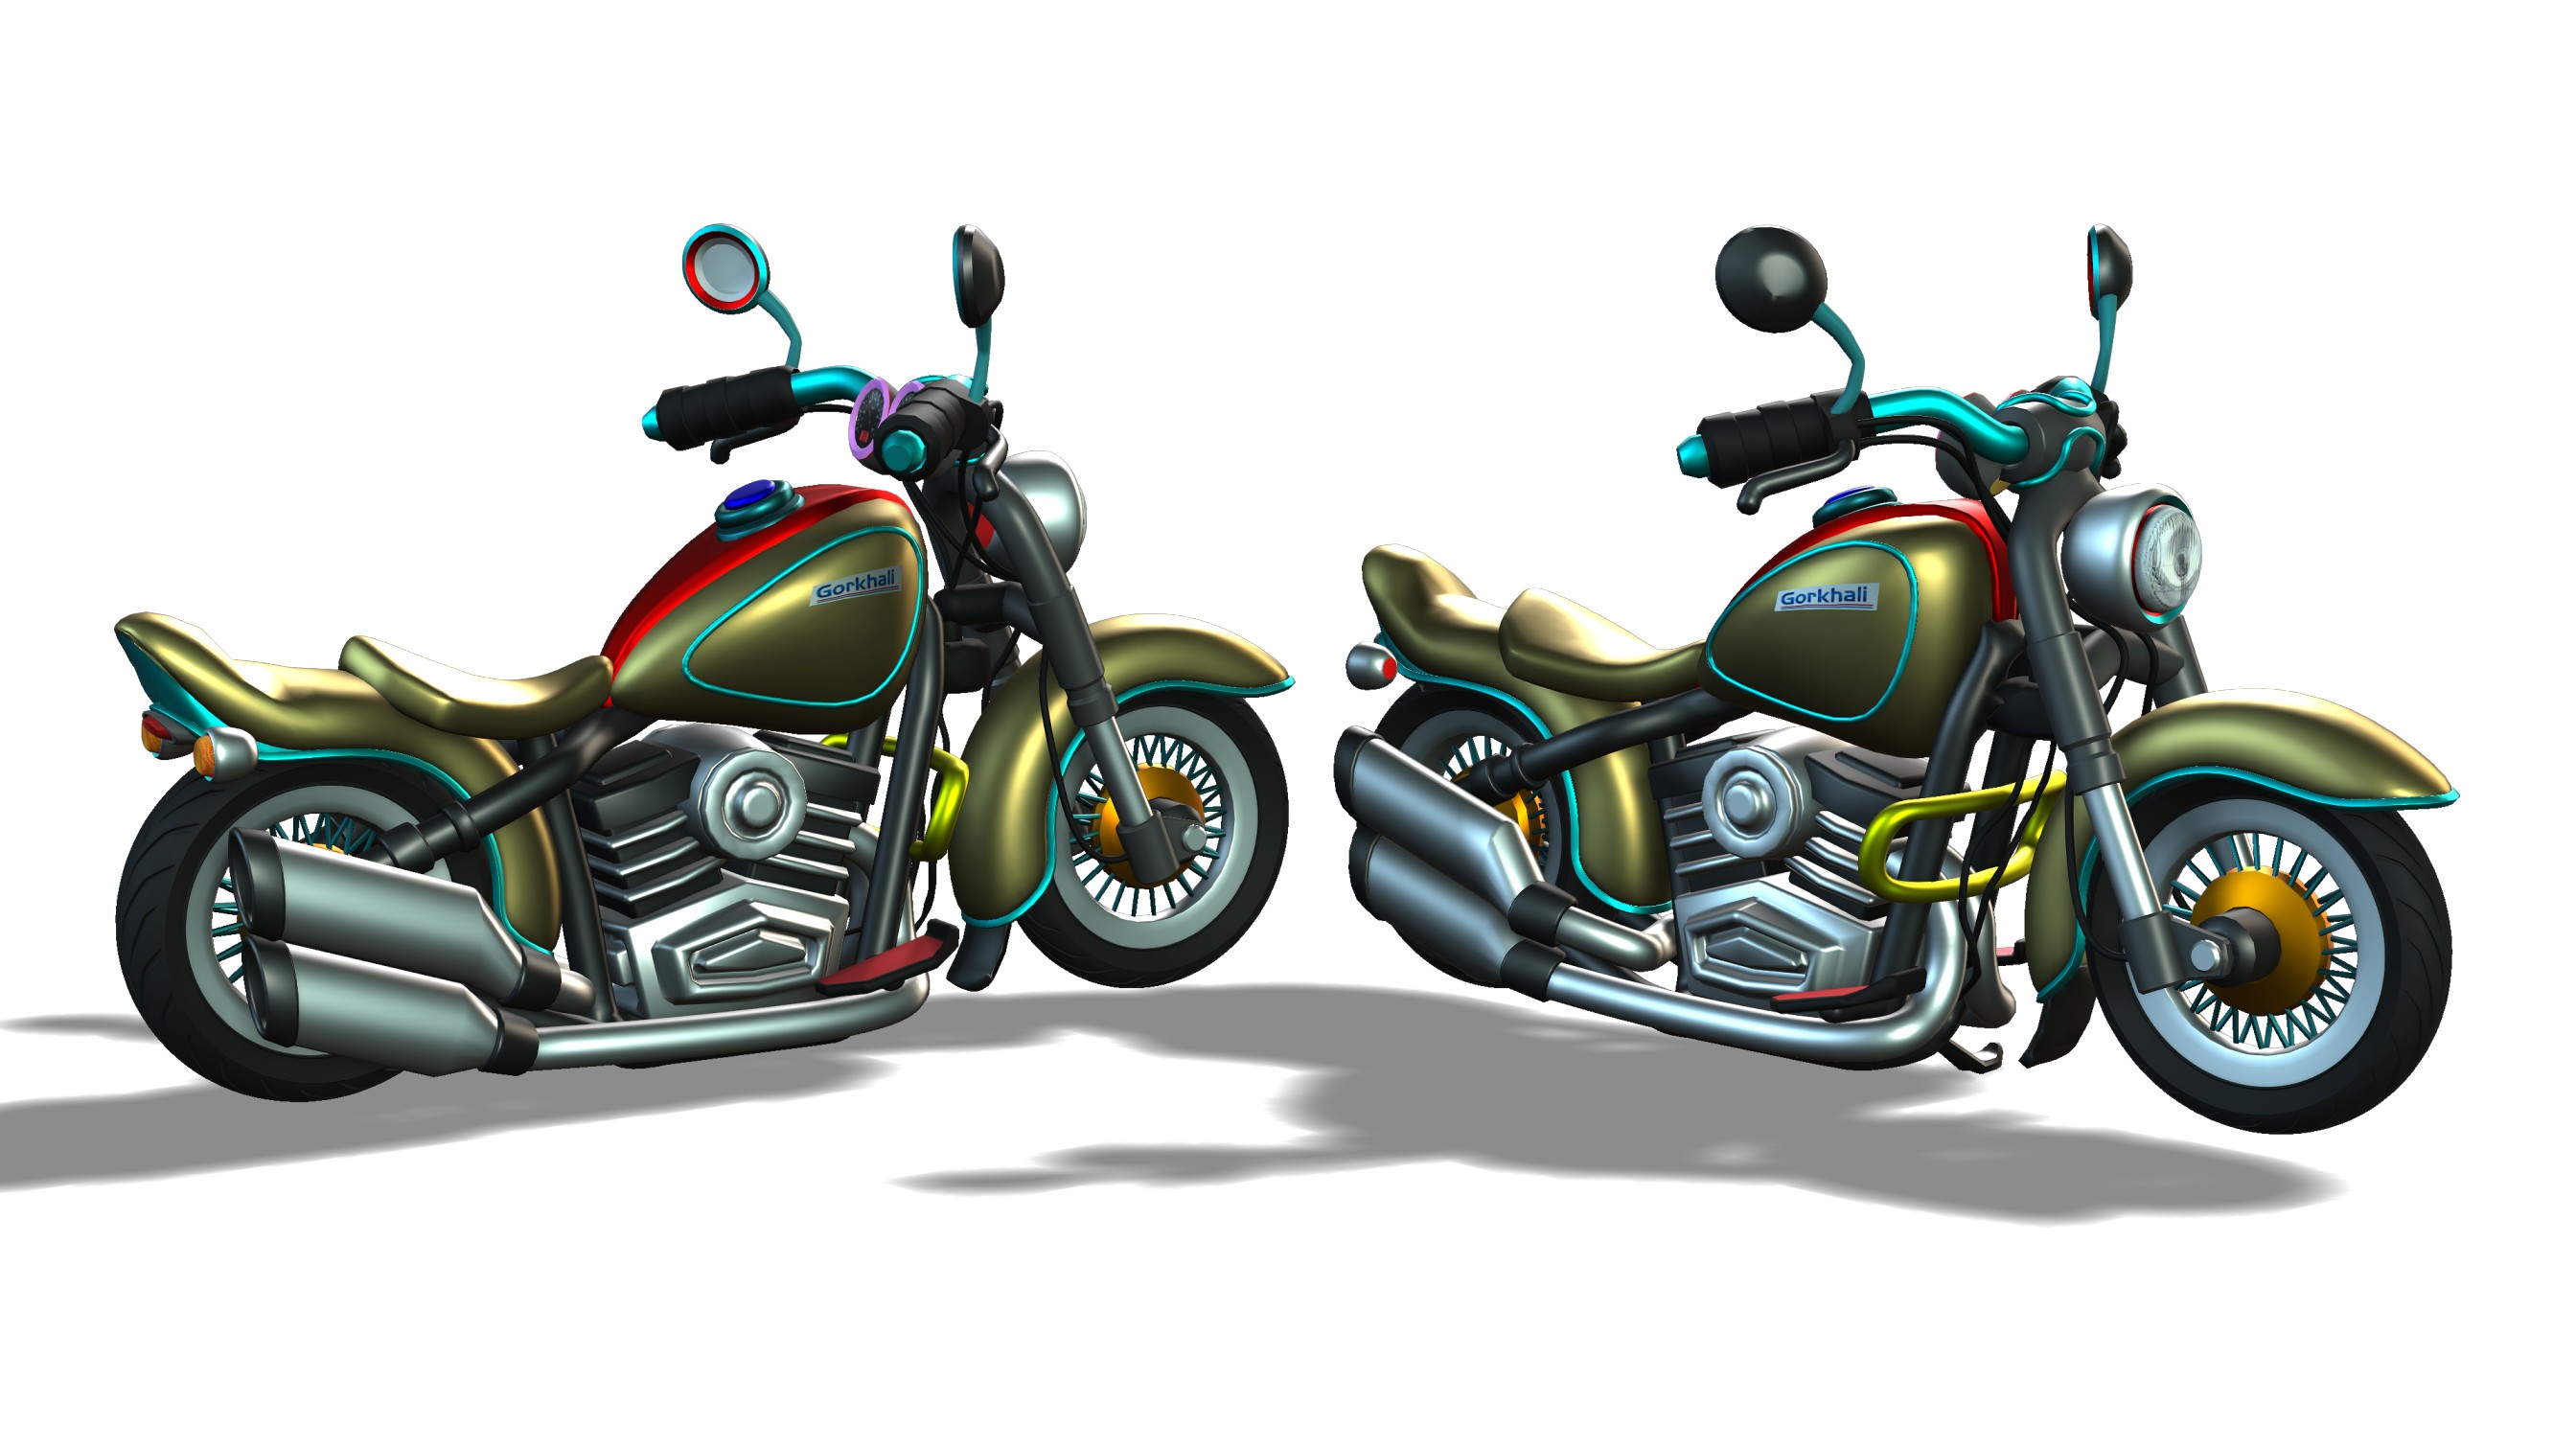 Motorcycle 3D Model free download in FBX format and iClone Props Files